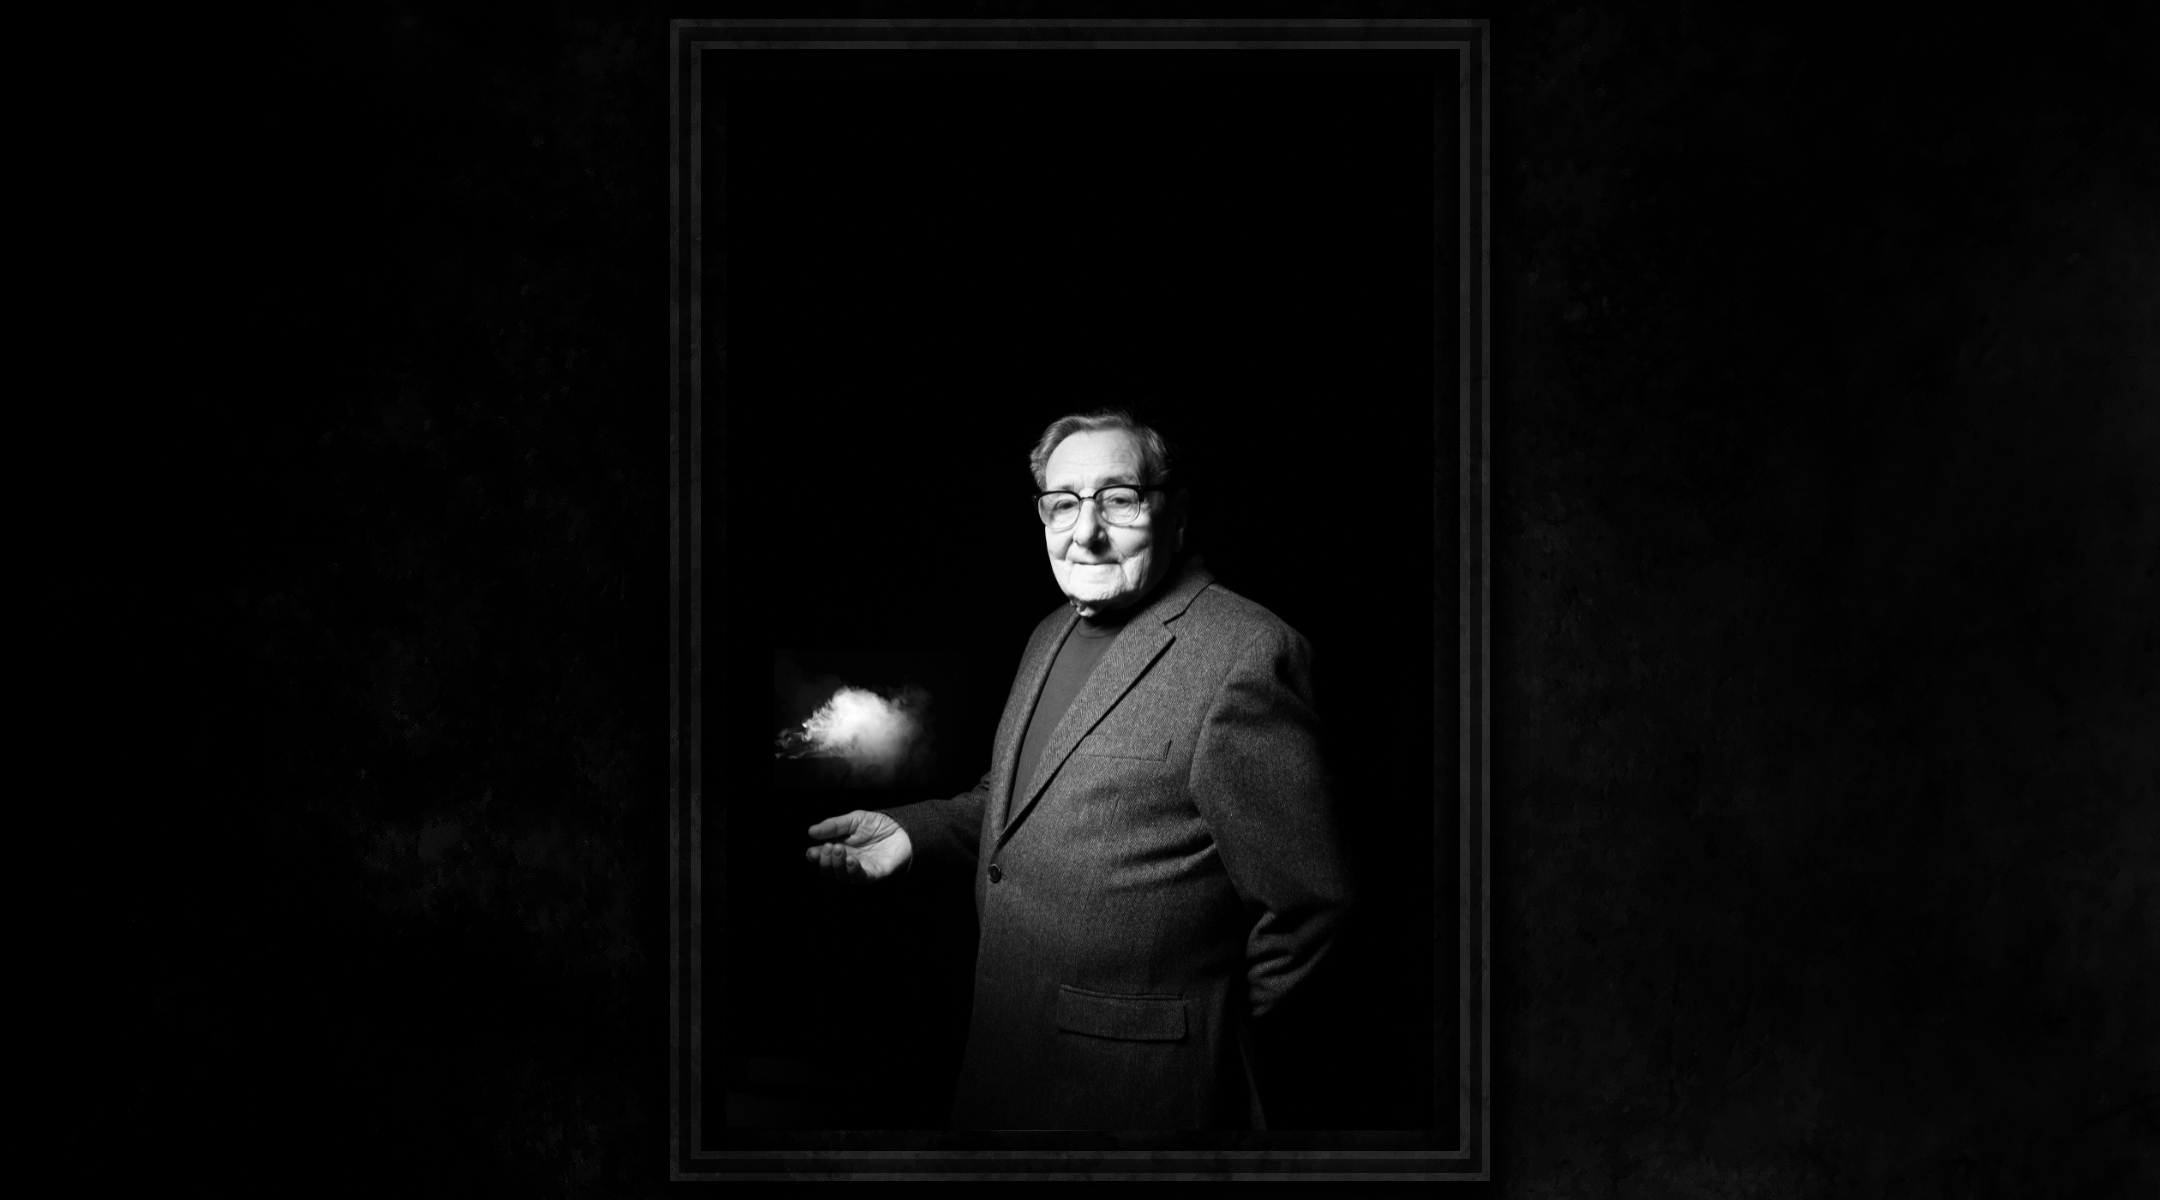 Holocaust survivor and magician Werner Reich poses for “Invited to Life”. (Courtesy of B.A. Van Sise / Design by Grace Yagel)